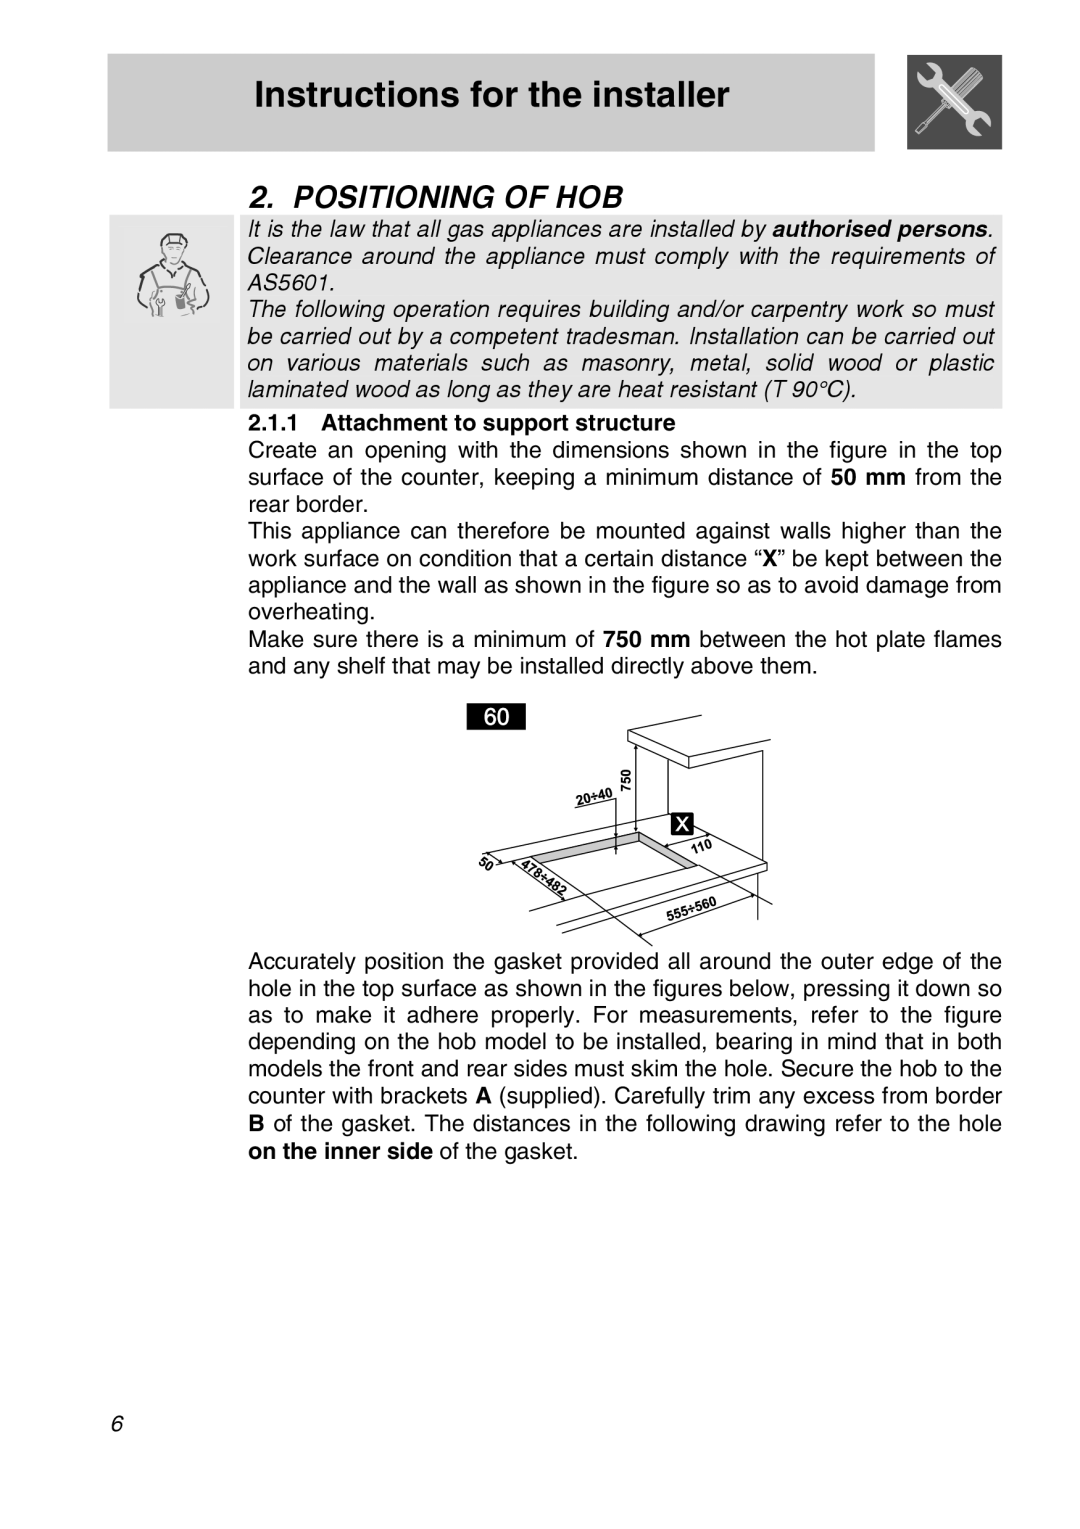 Smeg CIR60XS manual Instructions for the installer, Positioning Of Hob, Attachment to support structure 